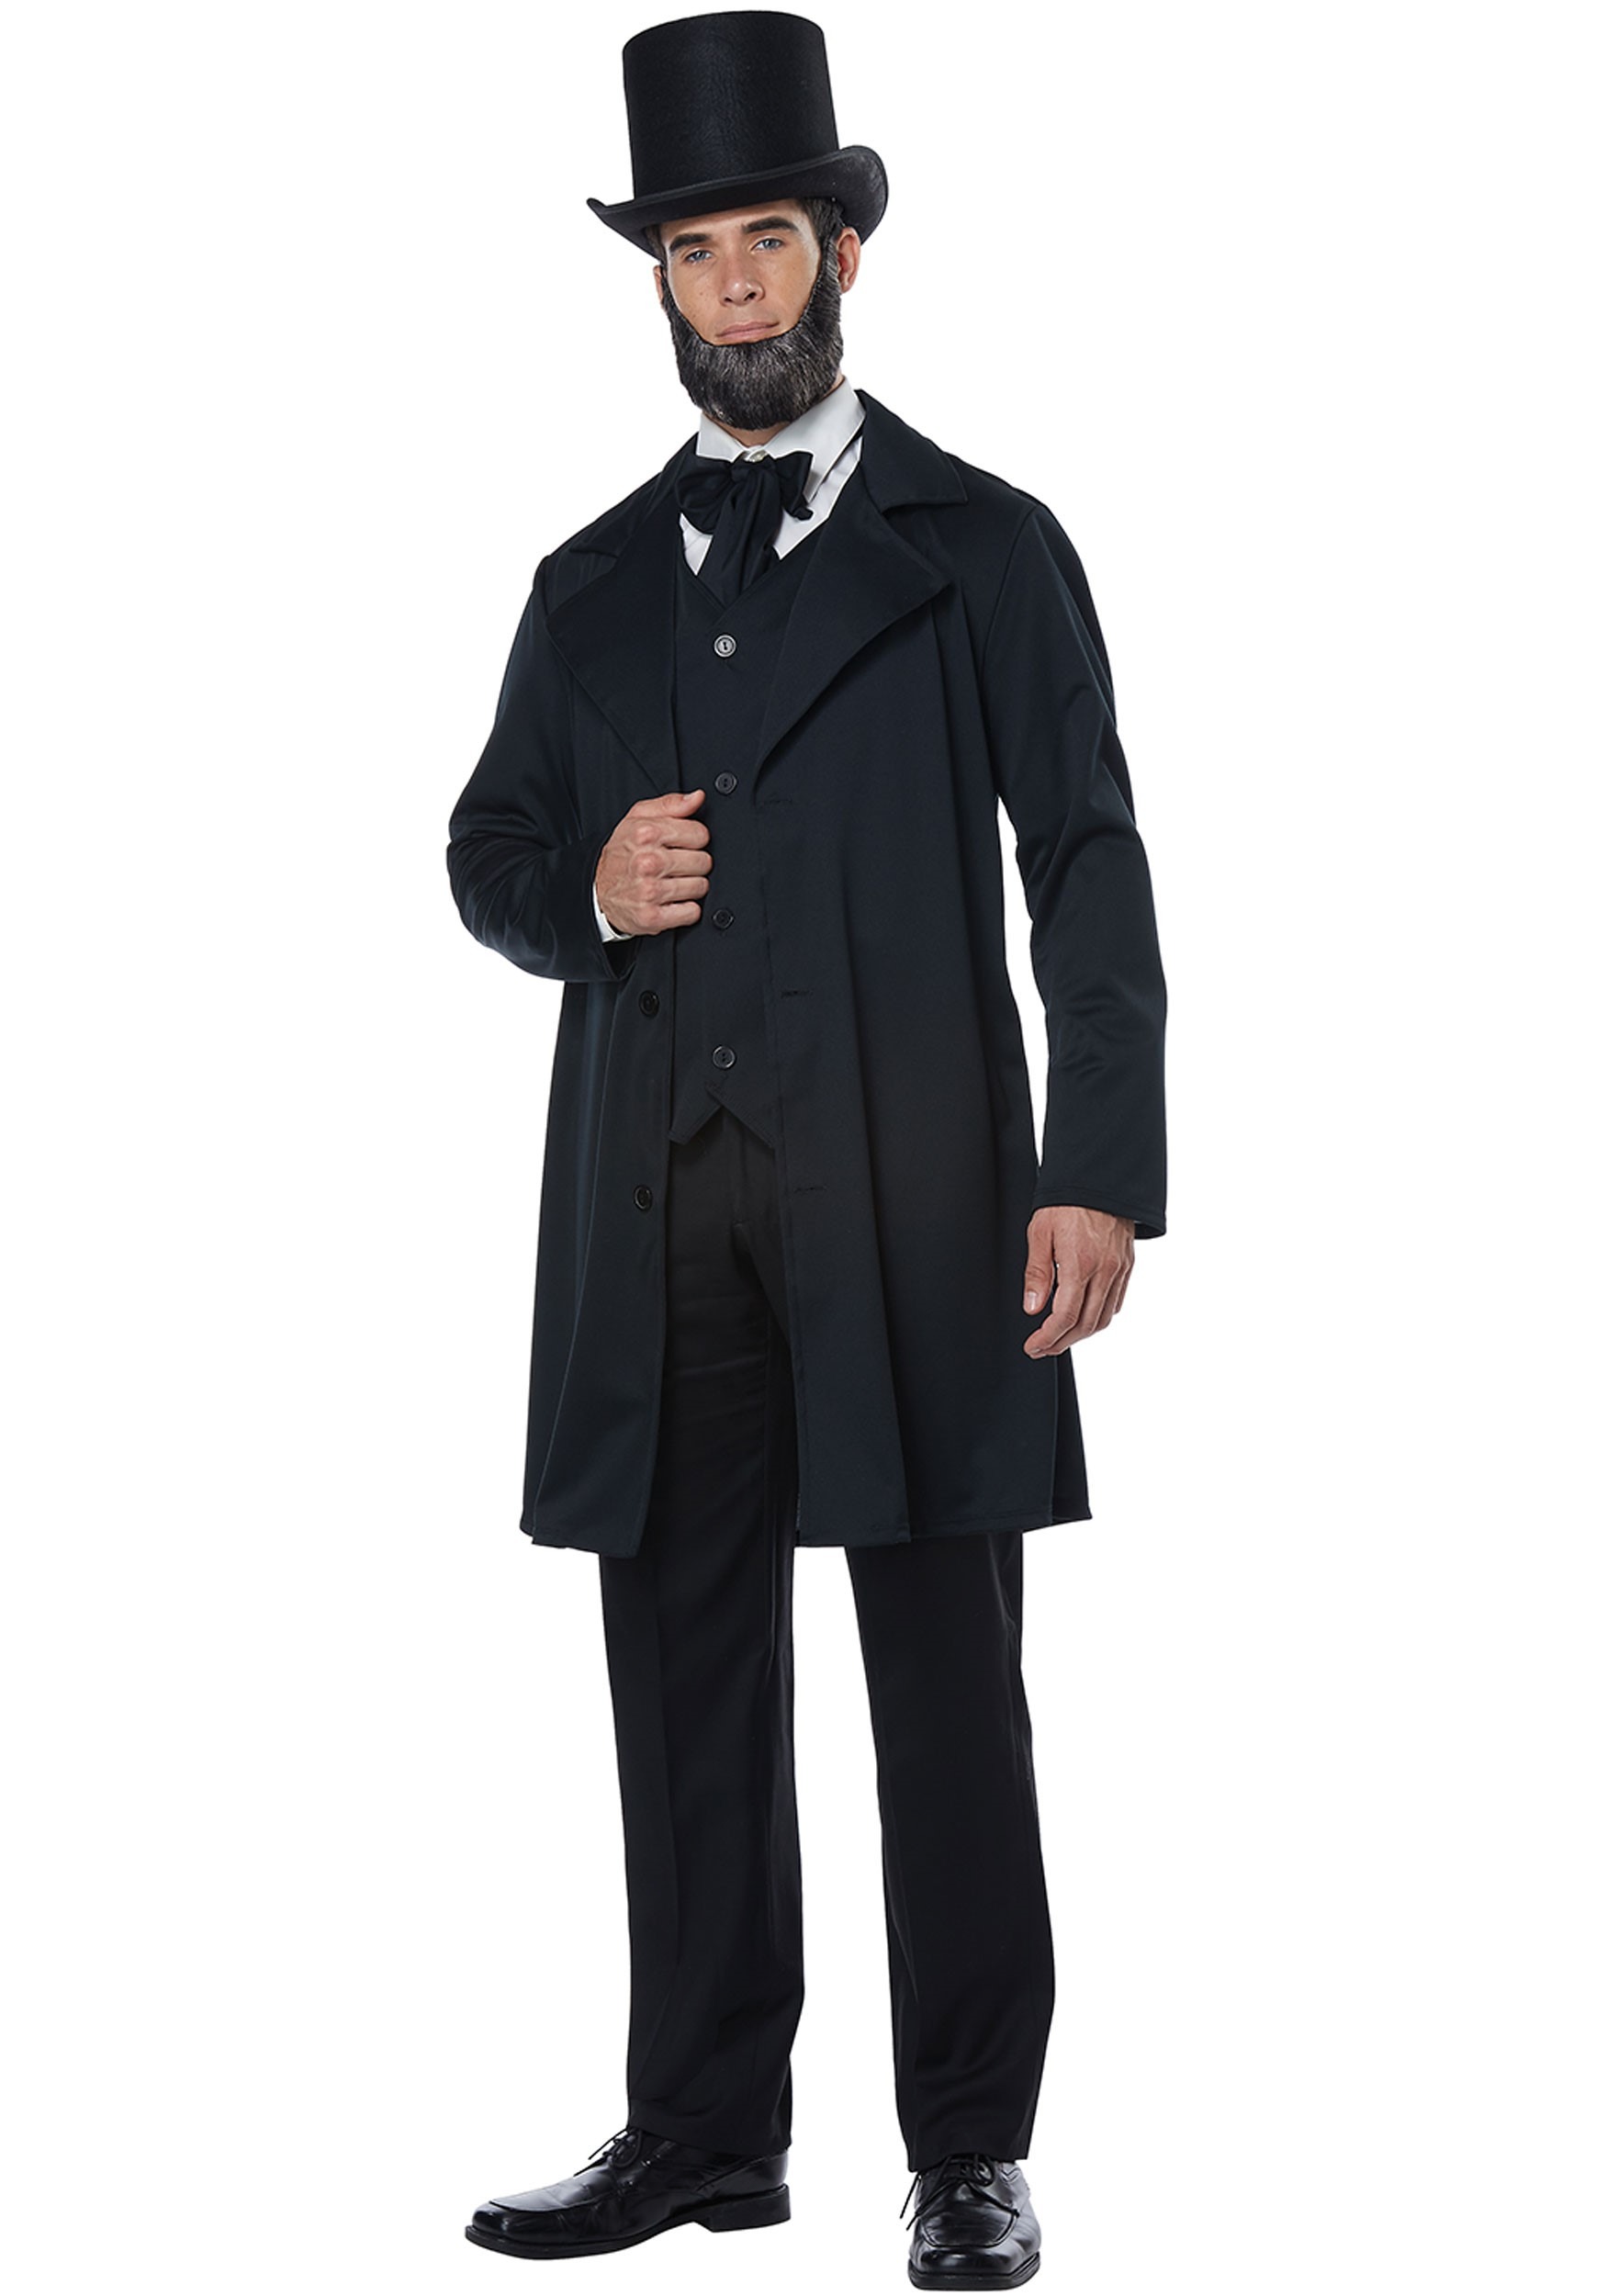 Frederick Douglass/Abraham Lincoln Adult Costume , Adult Historical Costumes